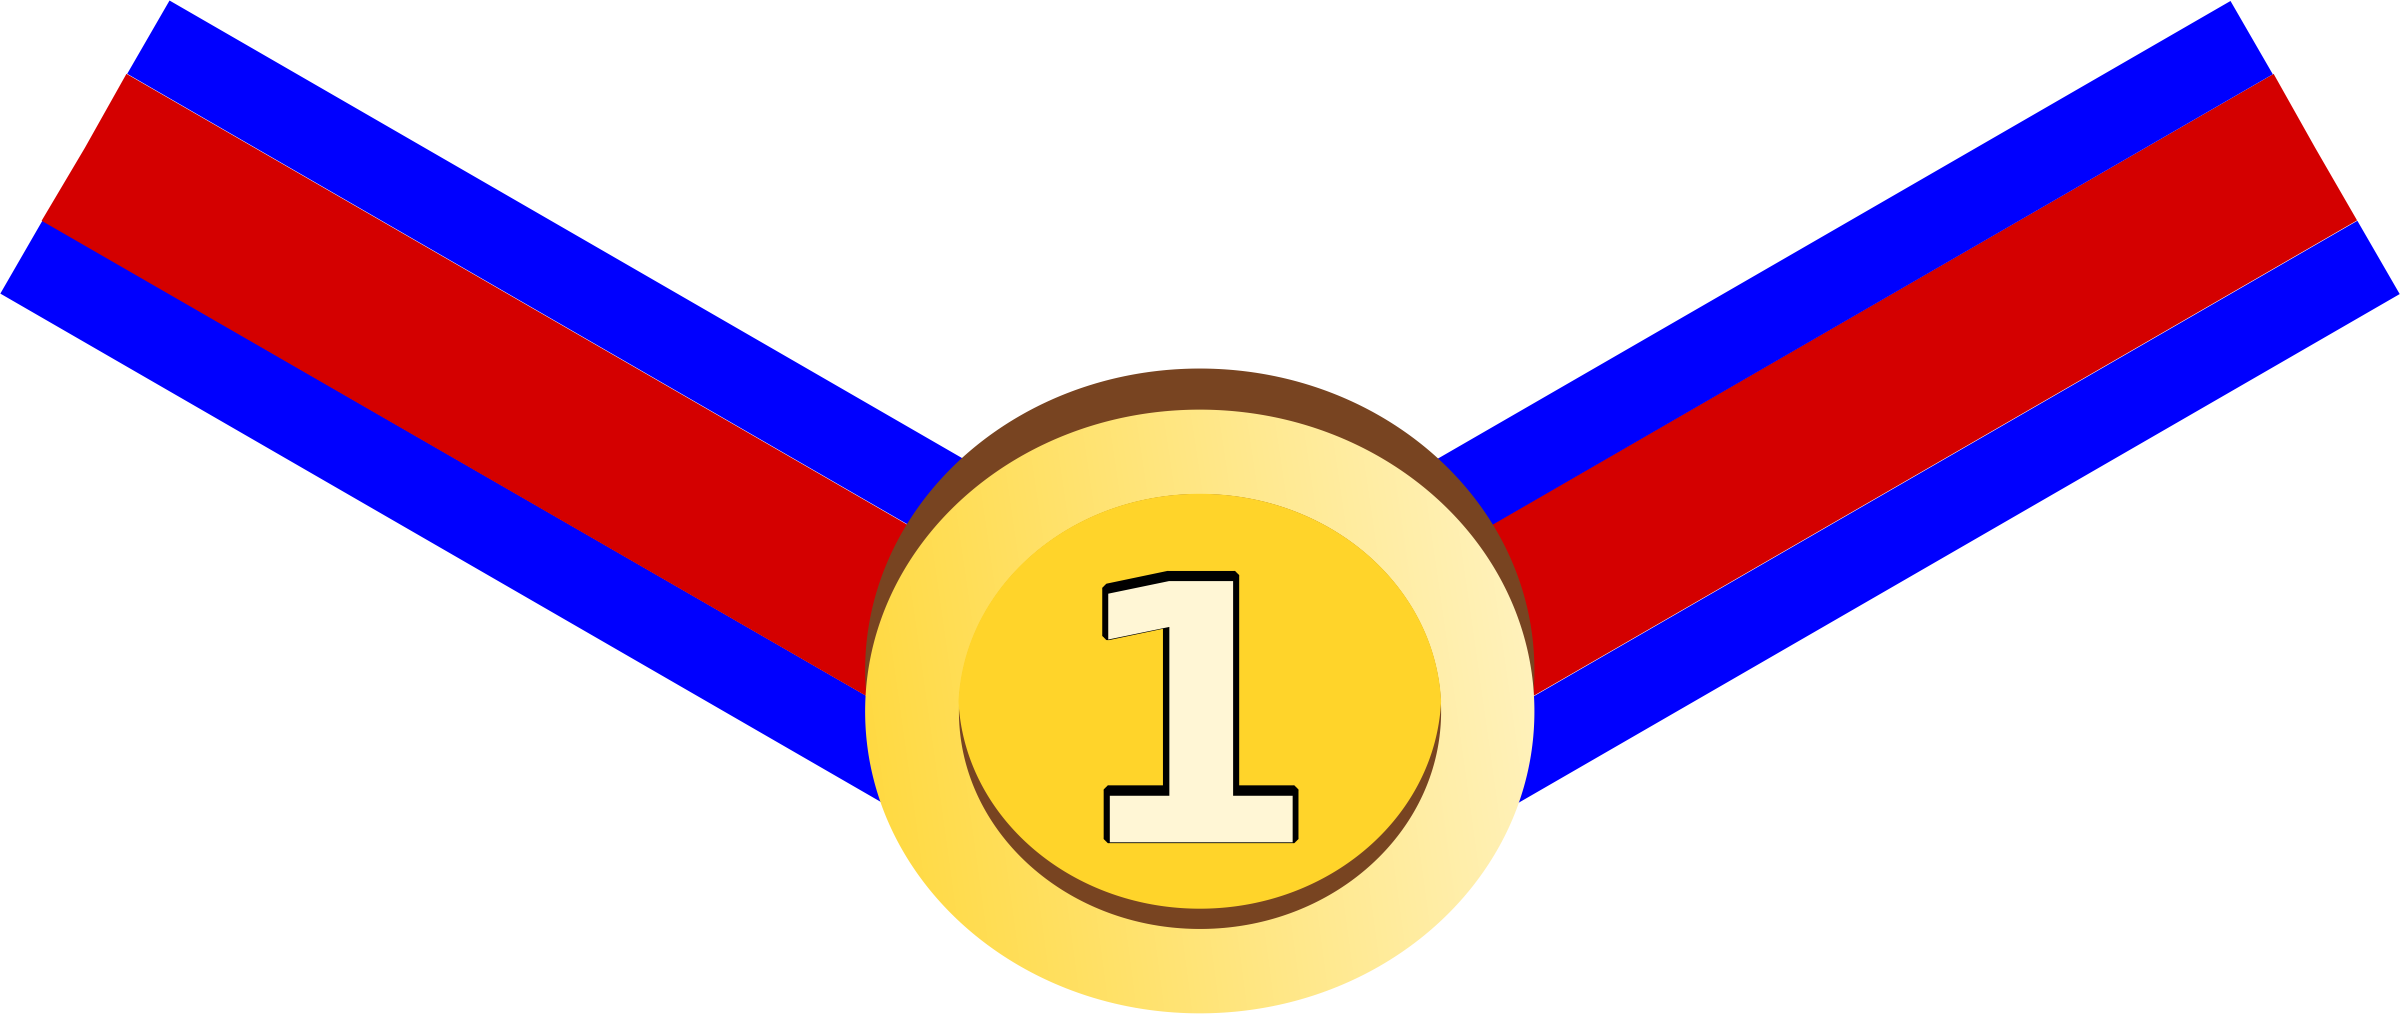 free clipart of medals - photo #35